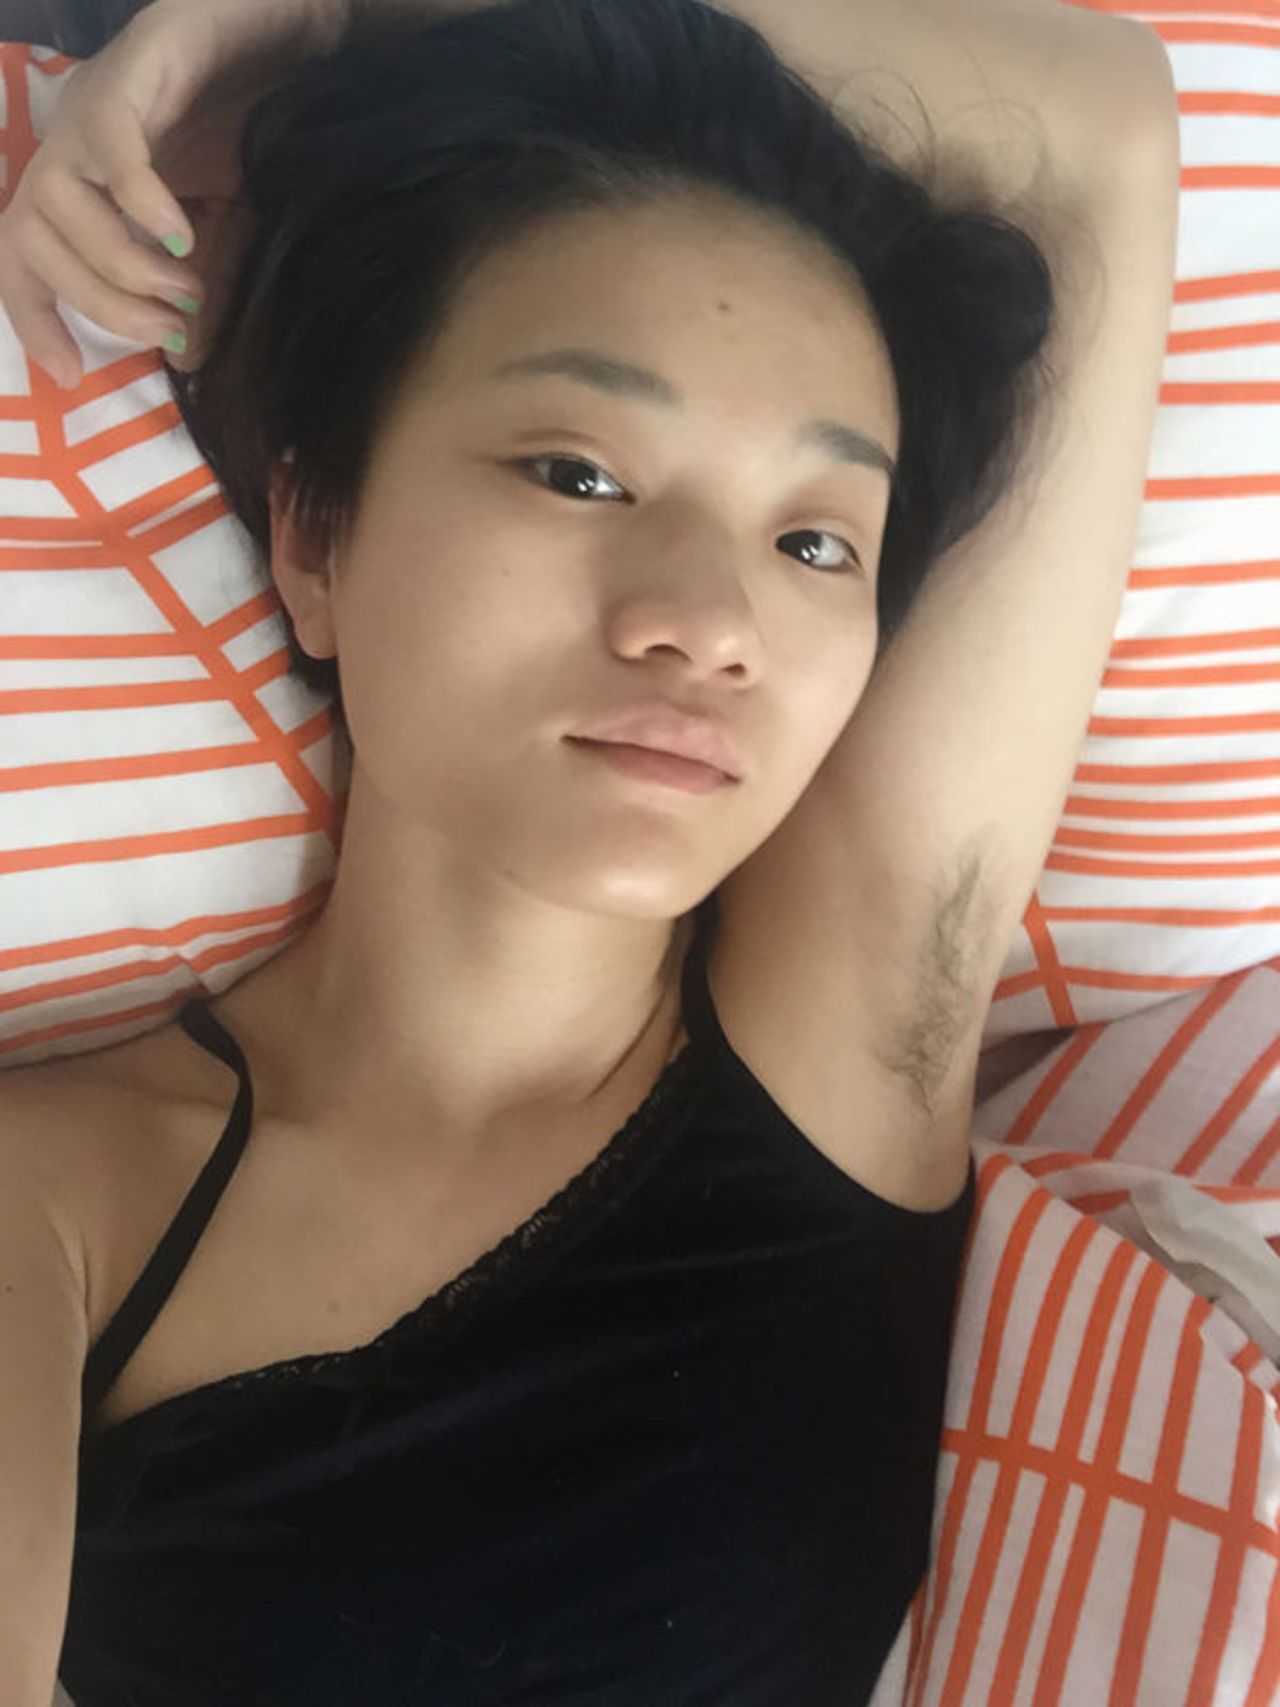 Sleep Chinese Girl Series Sex Videos - Chinese feminists show off armpit hair in photo contest | CNN